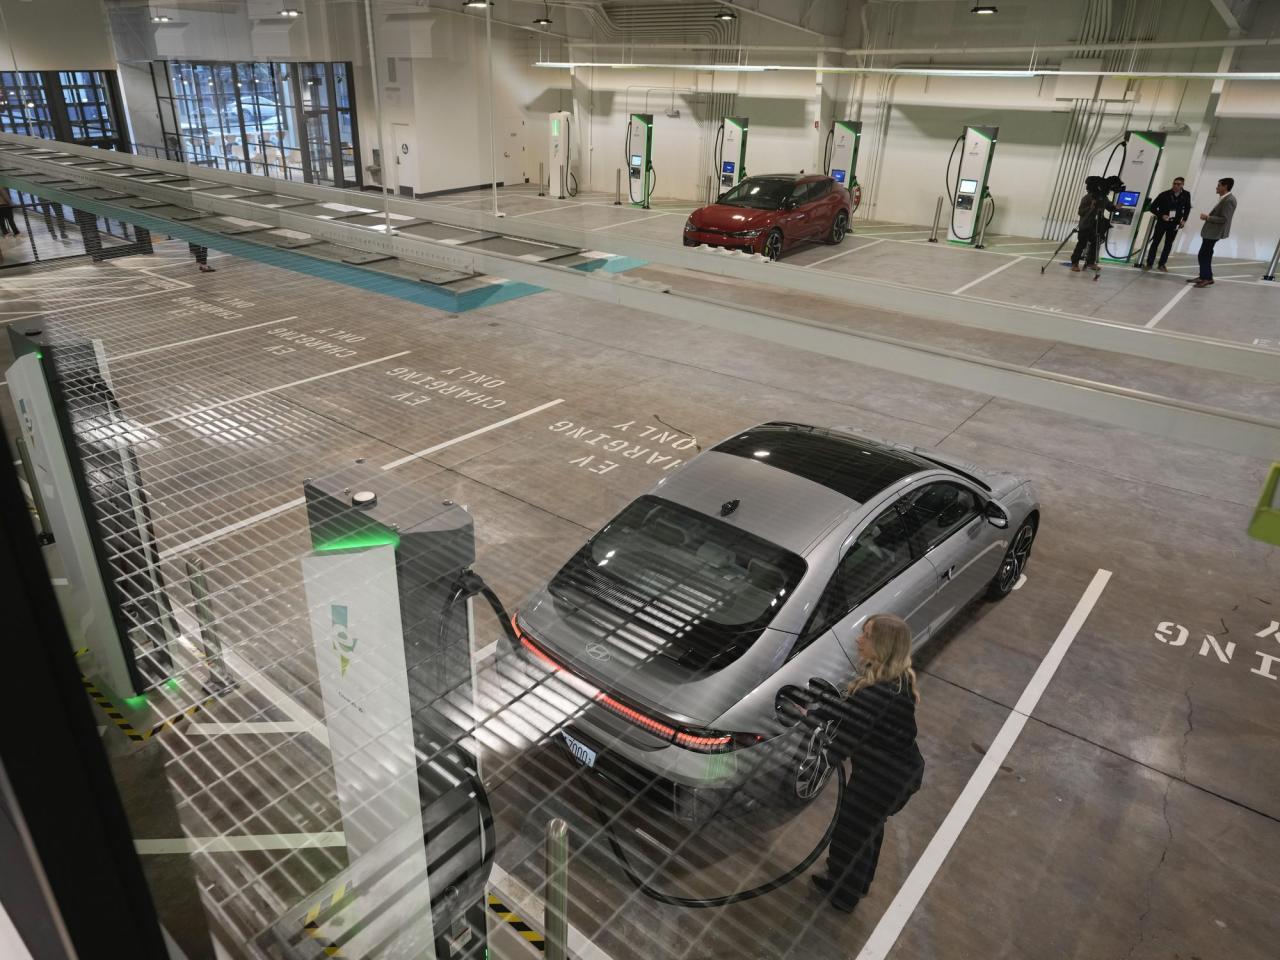 A recent addition of an indoor electric vehicle charging station in San Francisco provides a glimpse of what is to come in the future.